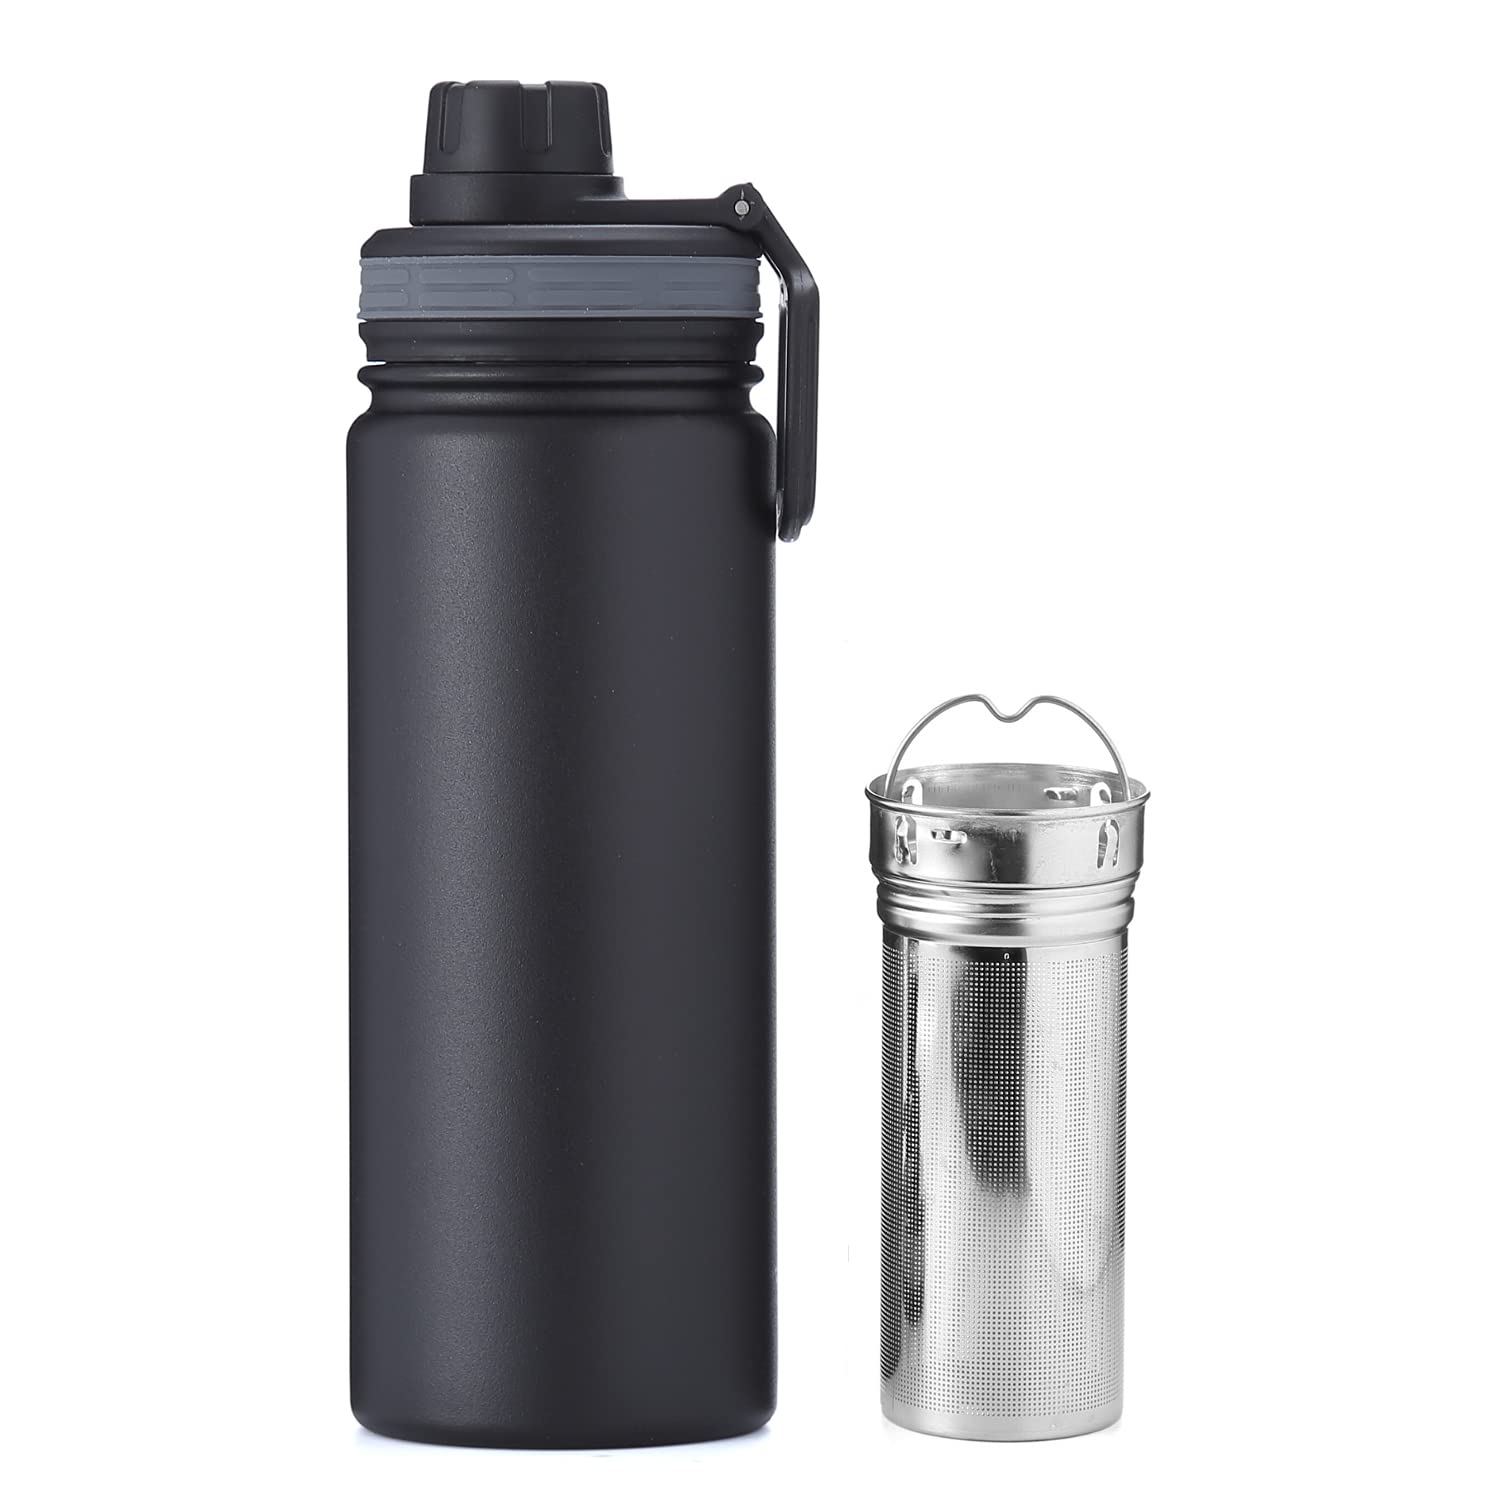 Tal Stainless Steel Ranger Tumbler (1 unit), Delivery Near You